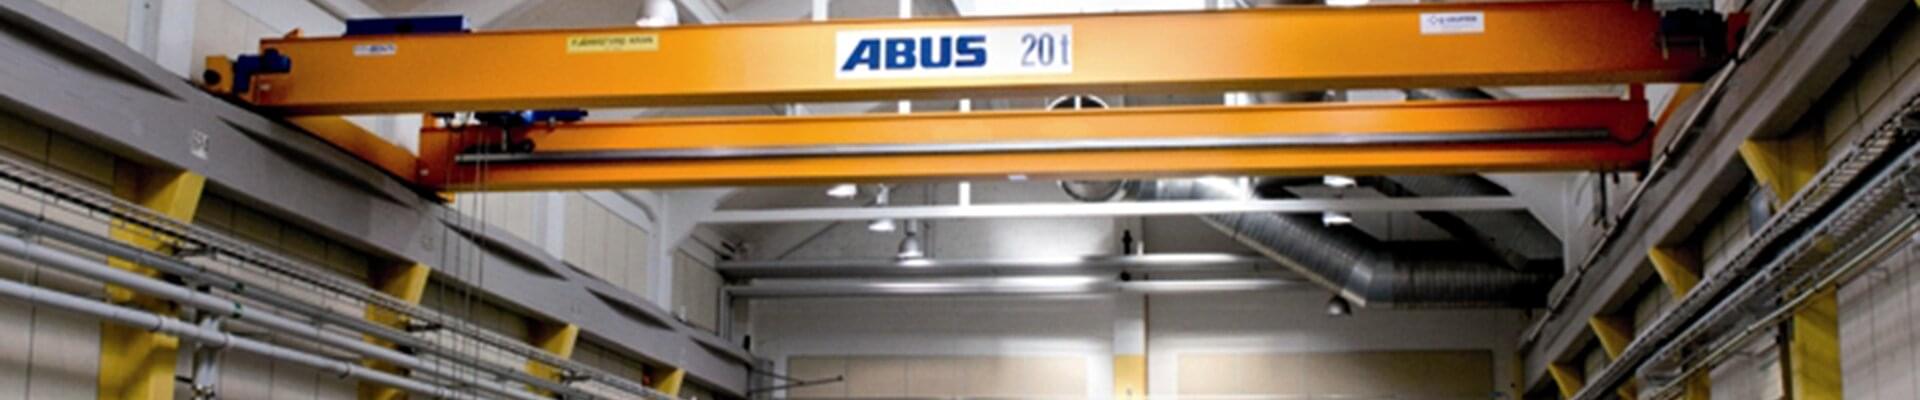 ABUS overhead travelling crane with a load capacity of 20 t in listed building in Sweden 